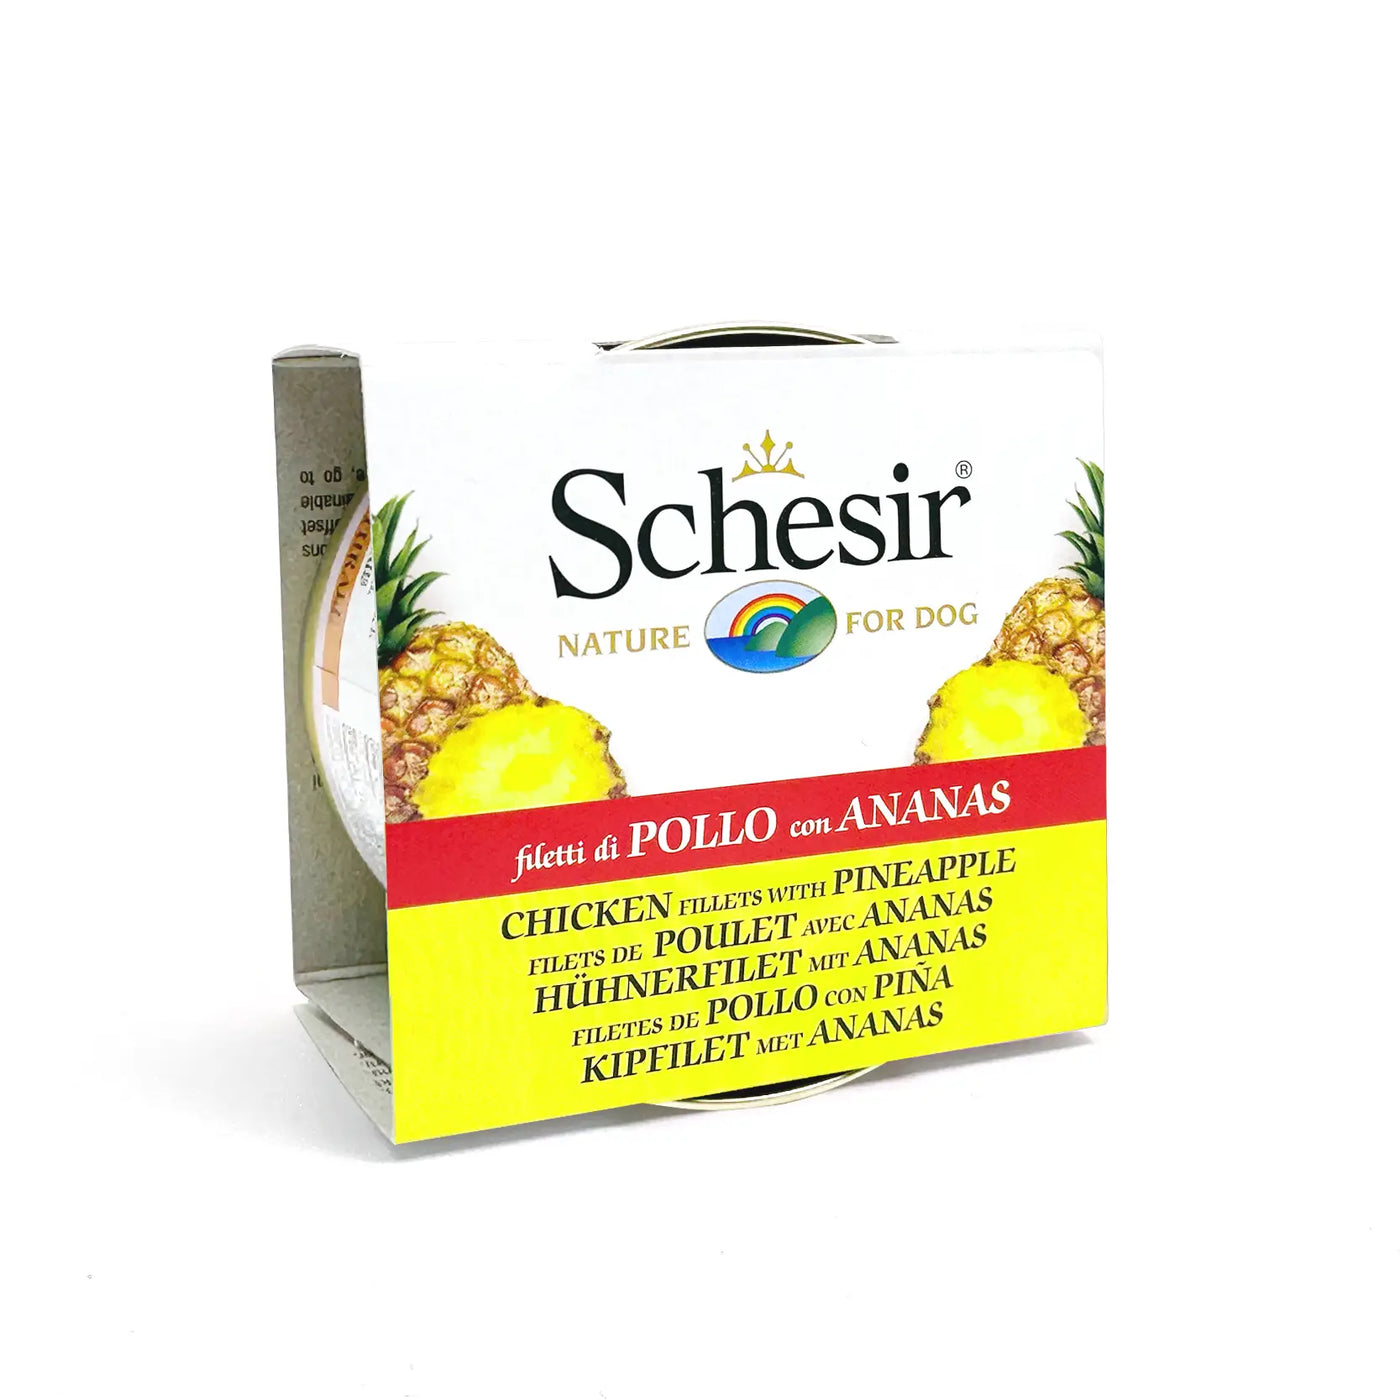 Schesir - Complementary Wet Food For Adult Dogs - Chicken Fillets With Pineapple In Jelly 150g